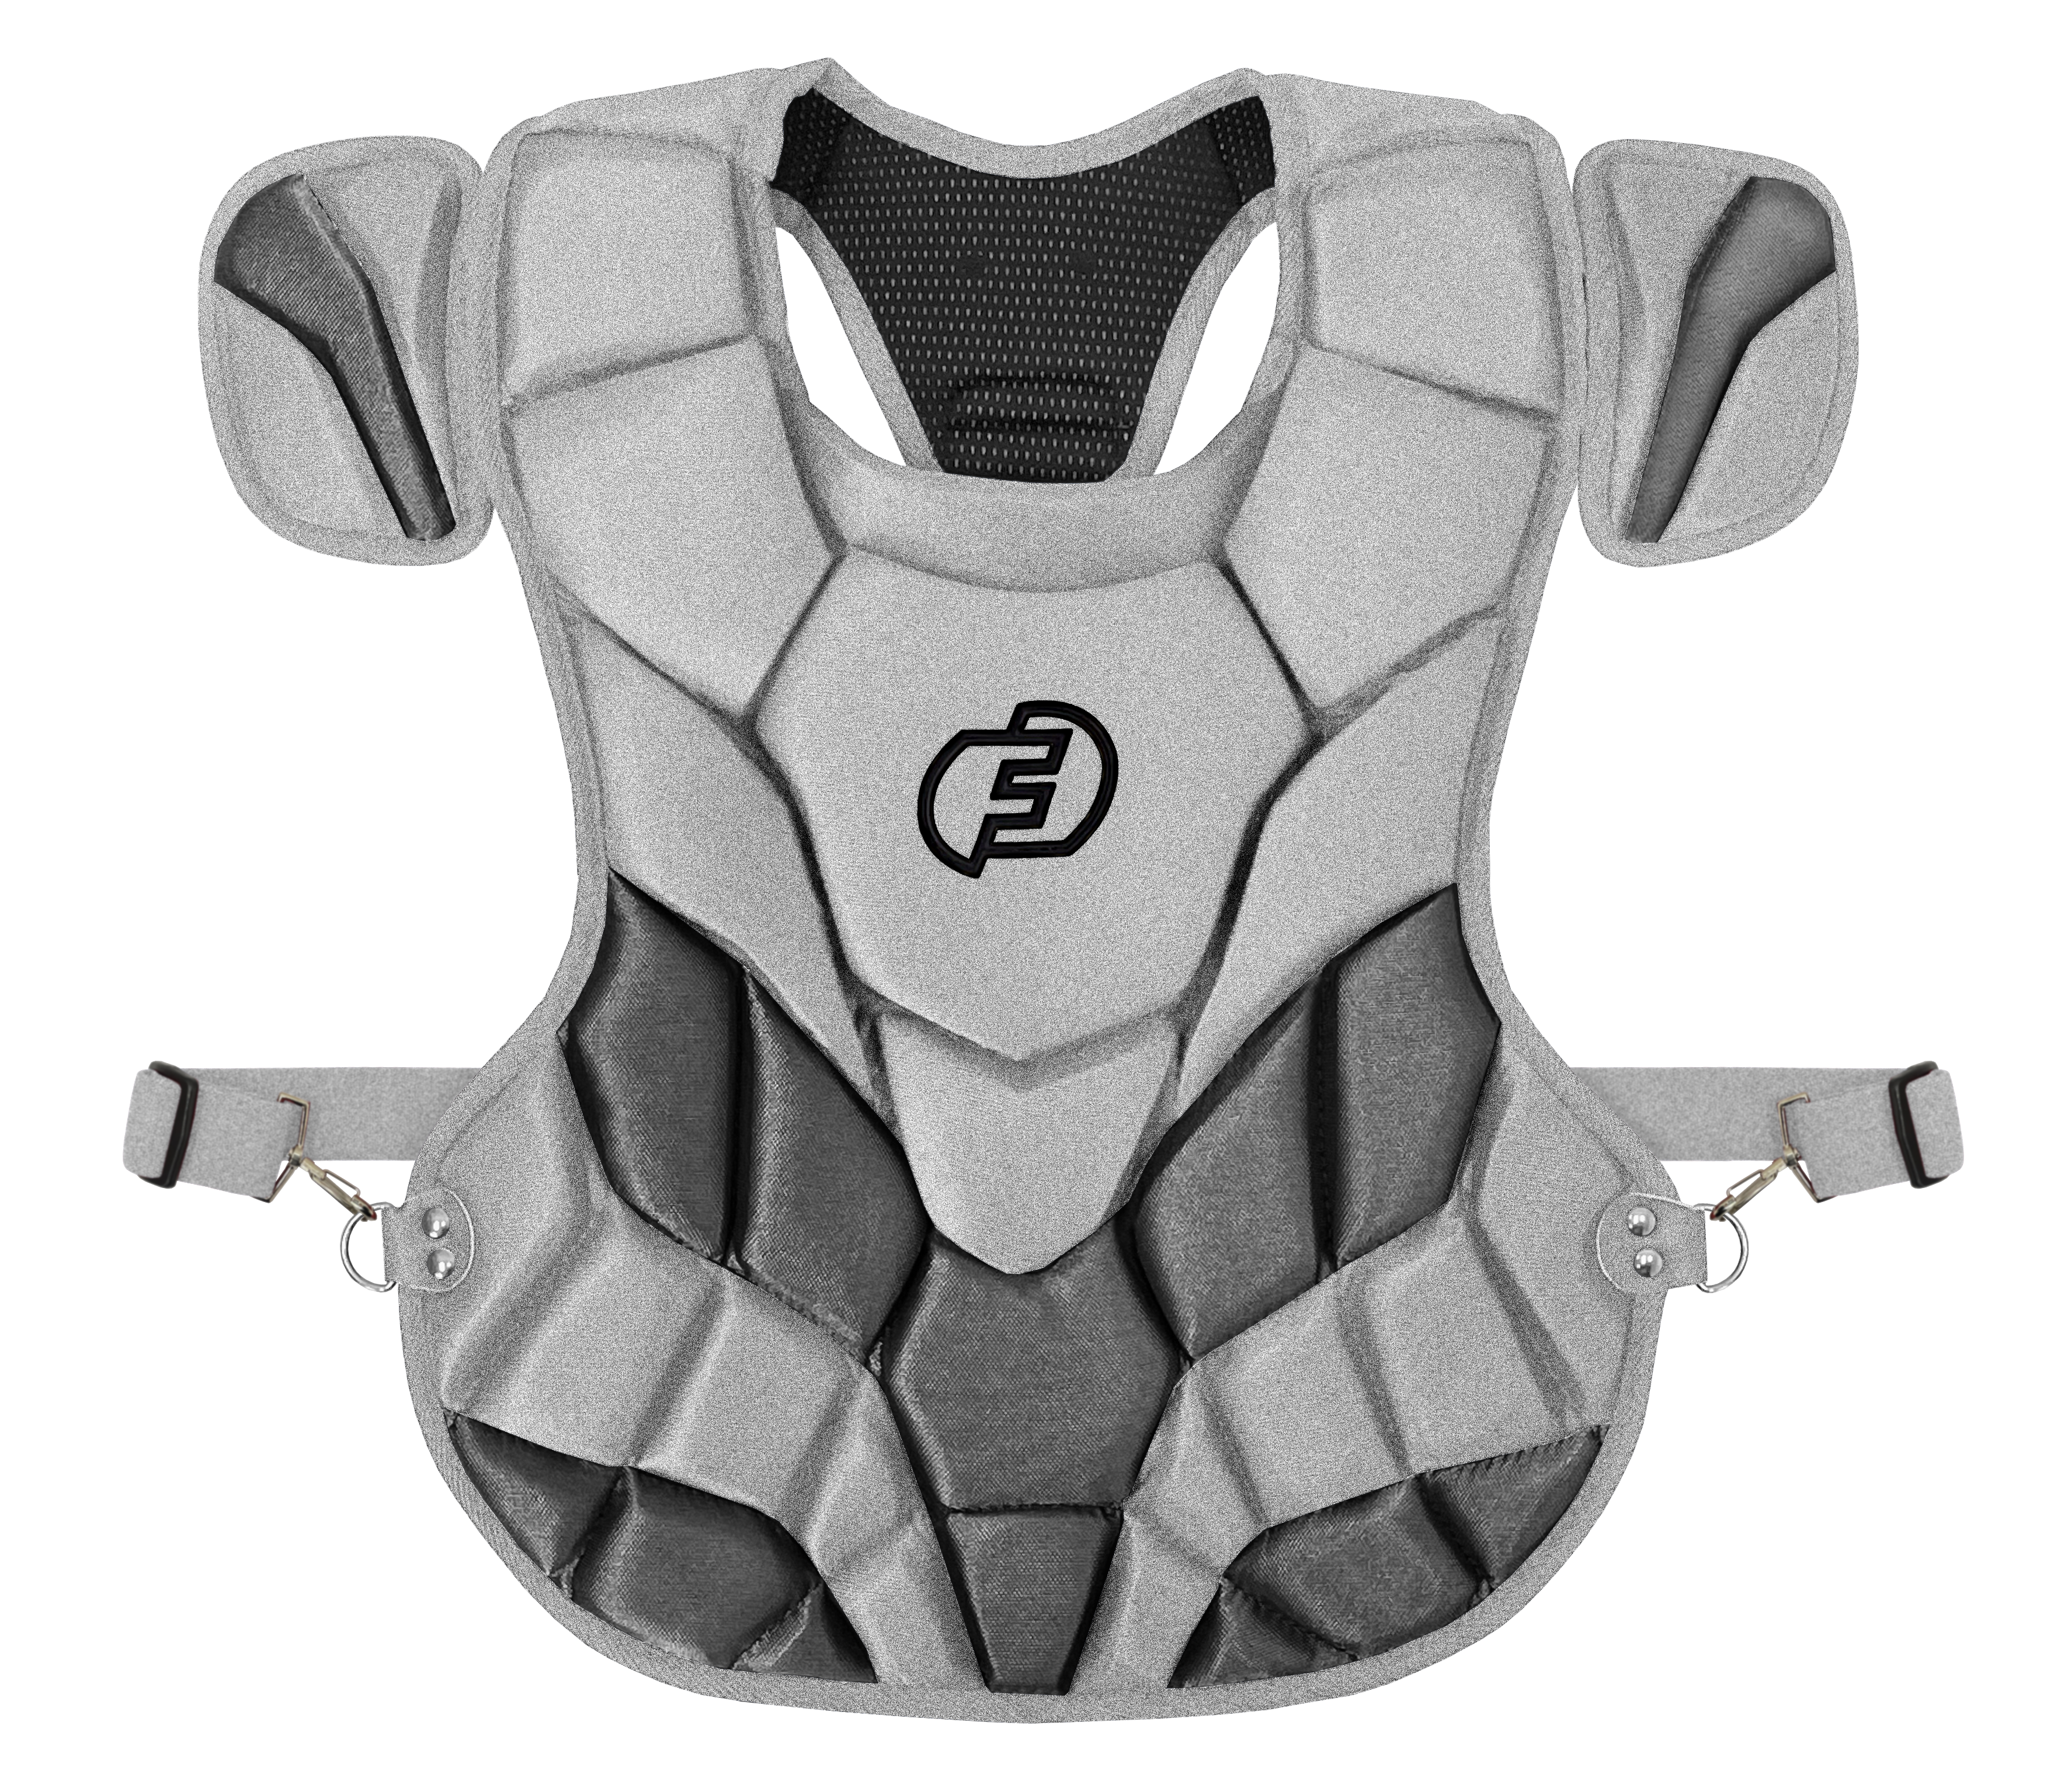 Force3 INTERMEDIATE |CHEST PROTECTOR WITH DUPONT™ KEVLAR® | SEI CERTIFIED TO MEET NOCSAE STANDARD